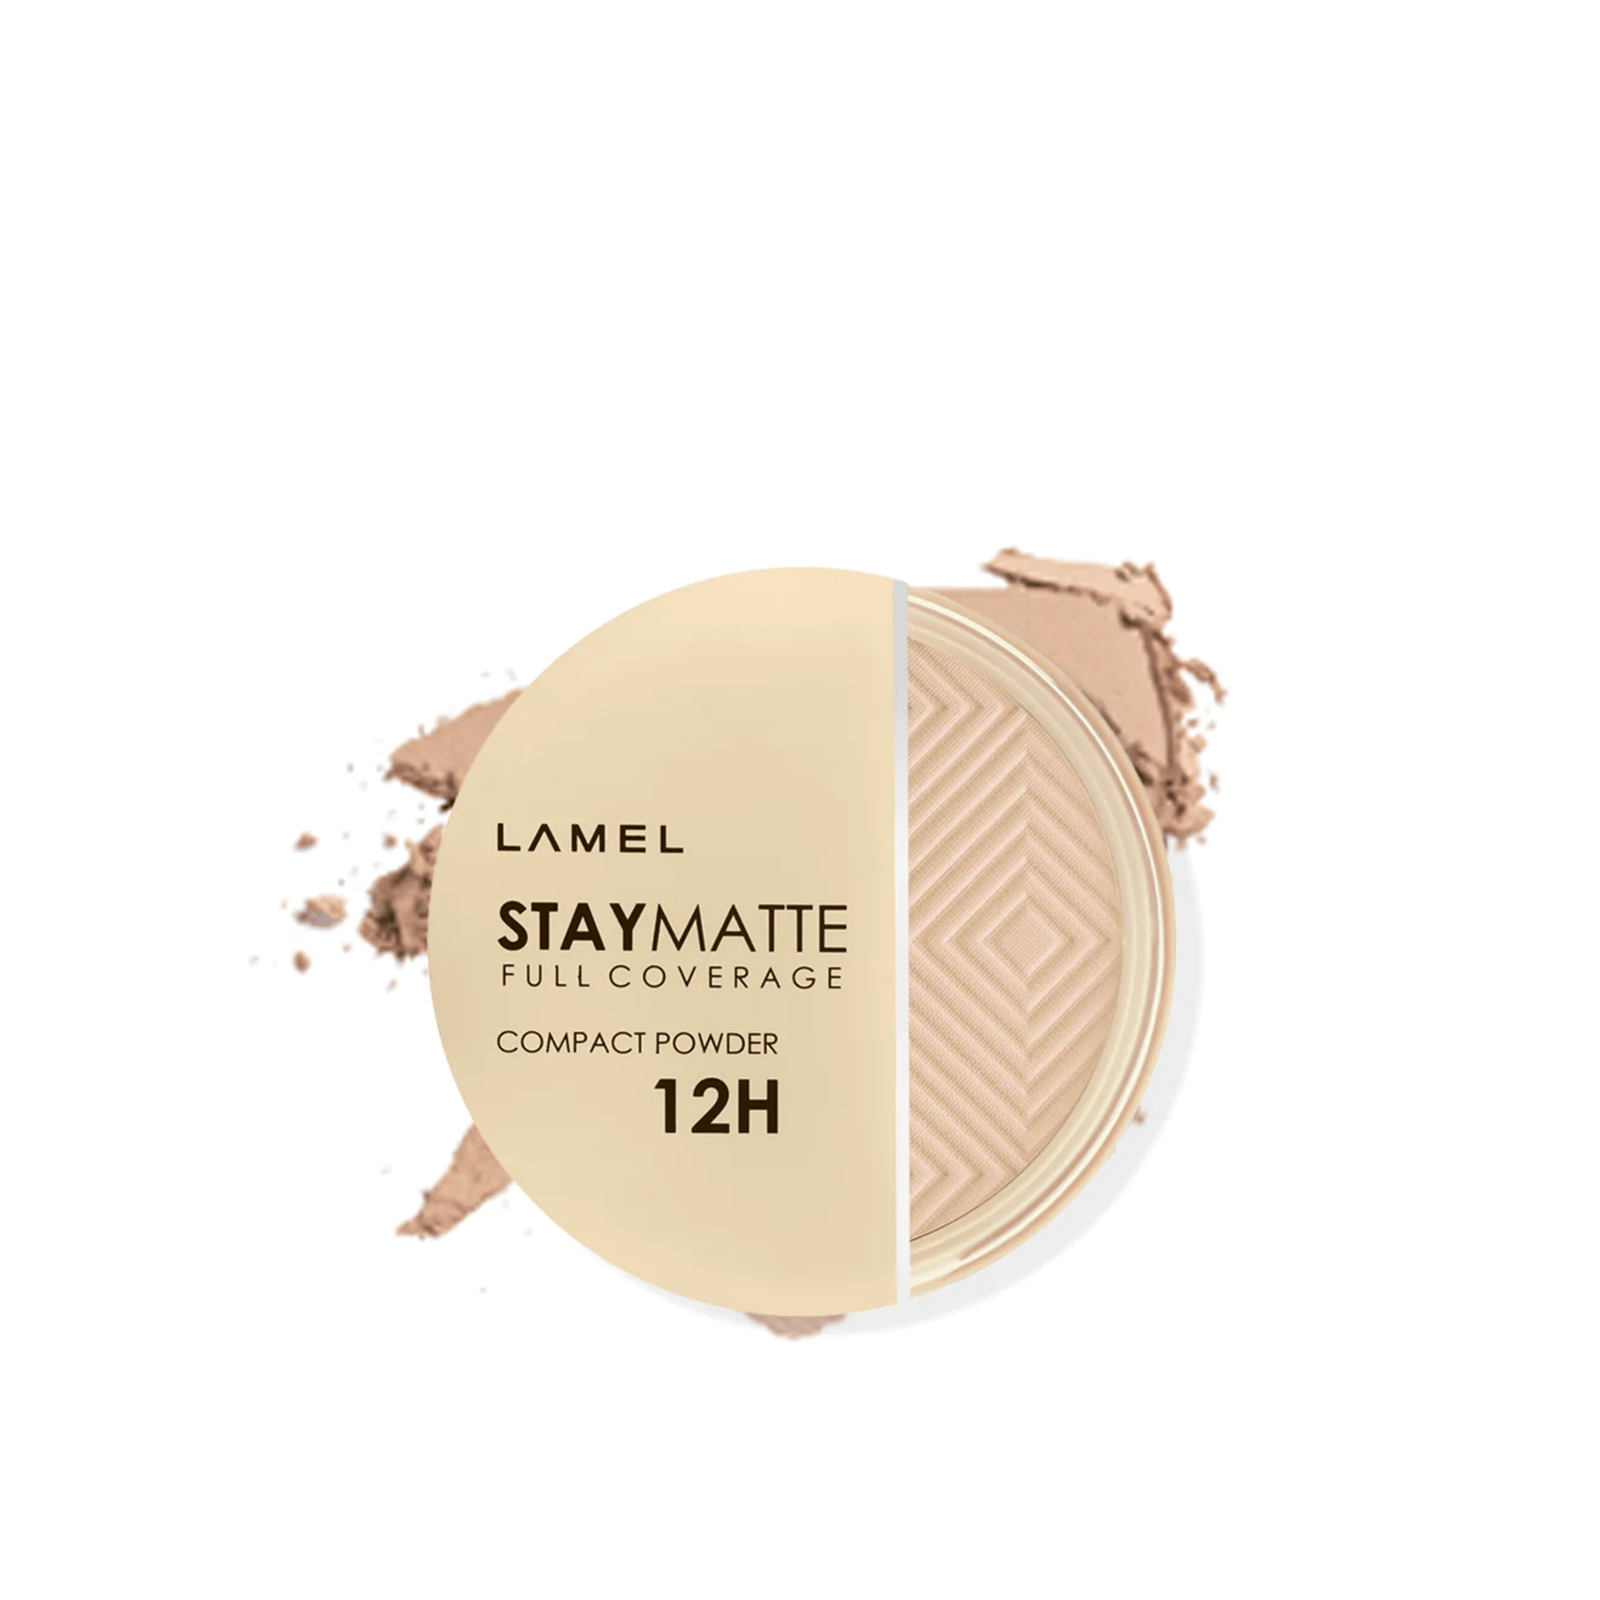 Lamel Stay Matte Full Coverage Compact Powder 402 Cold Ivory 12g (0.42oz)